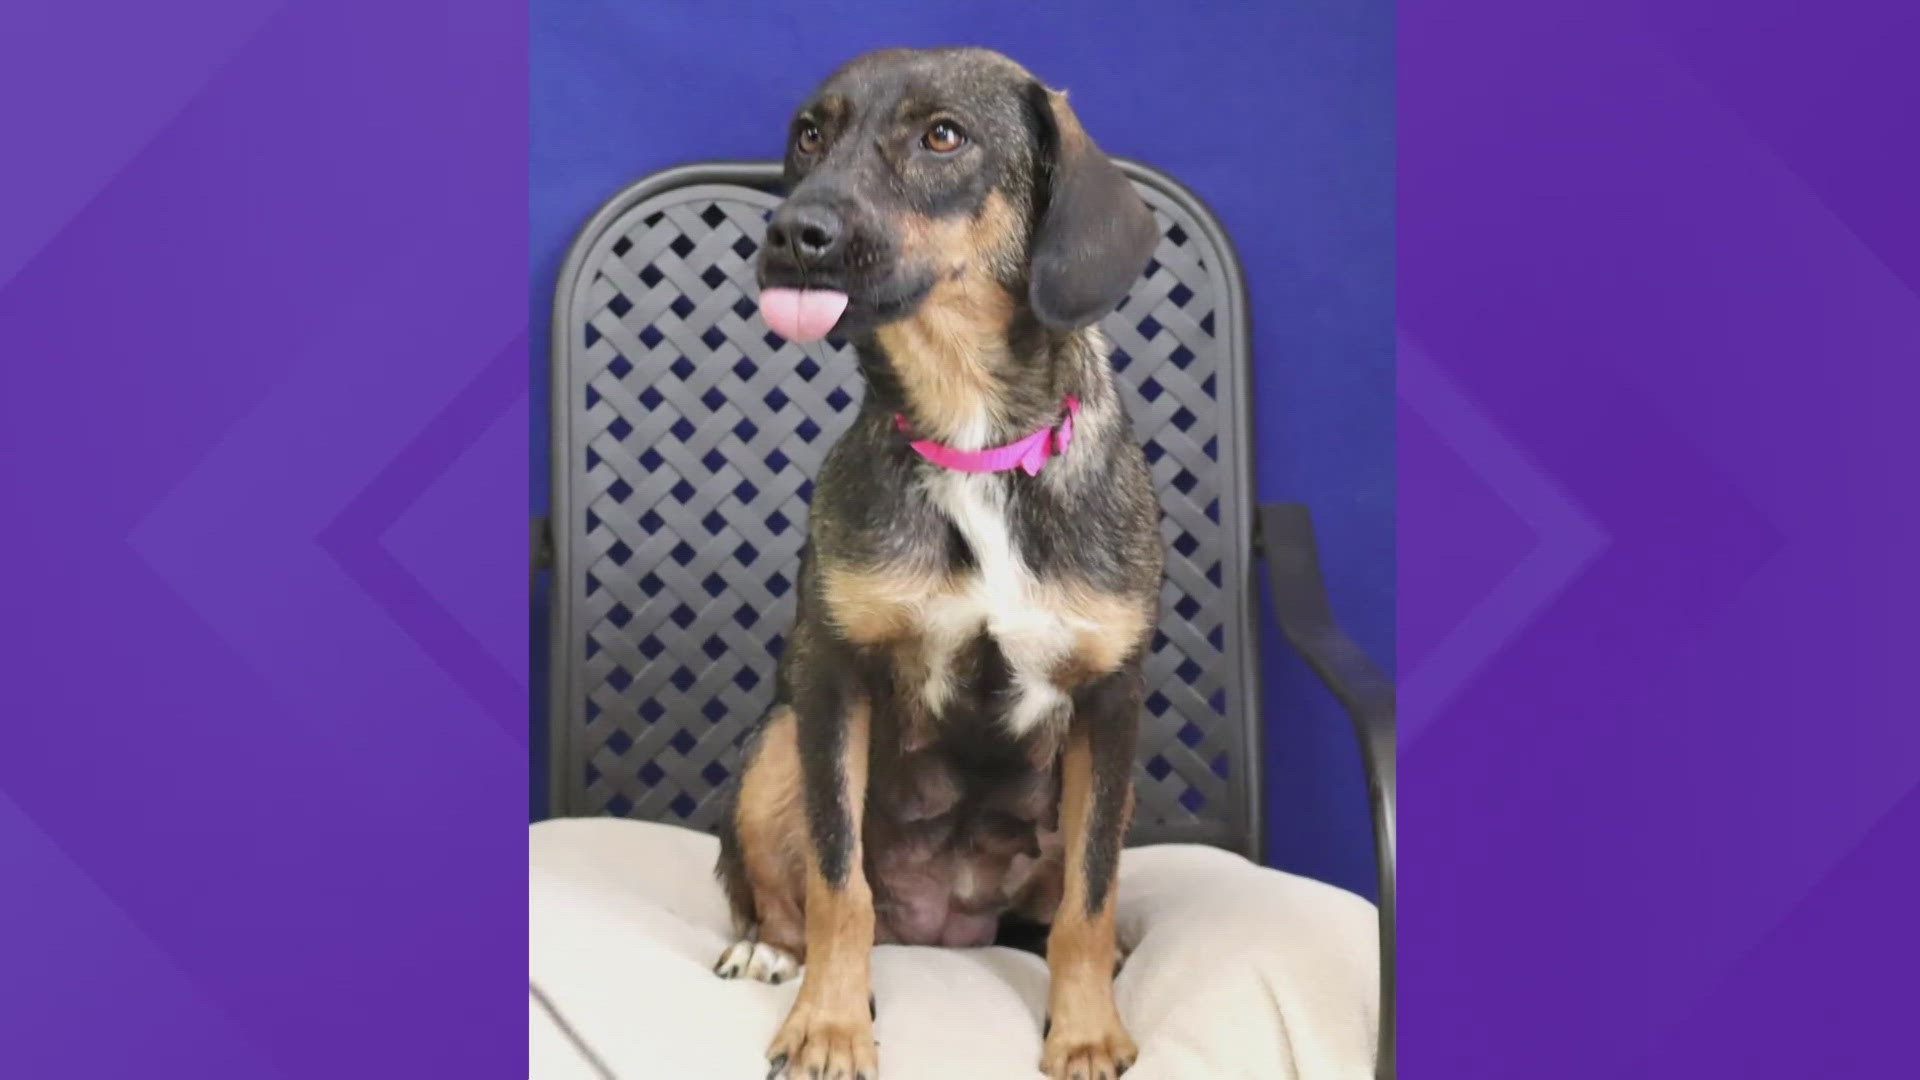 Toffee is a 30-pound three-year-old hound mix that lives up to her sweet name.